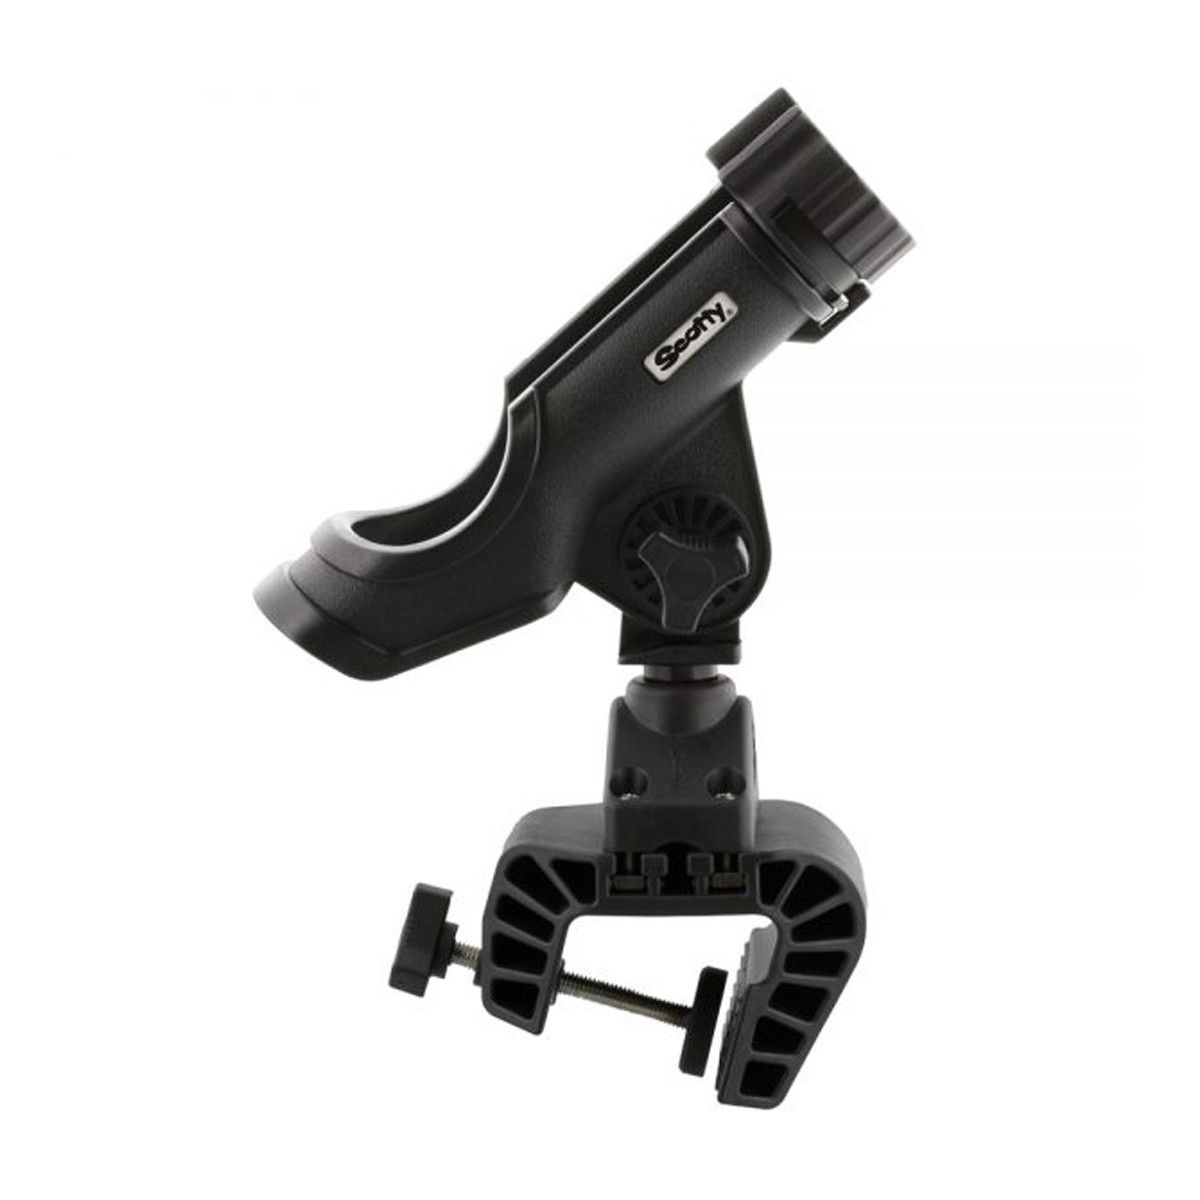 SCOTTY 339 POWER LOCK WITH 449 PORTABLE CLAMP MOUNT